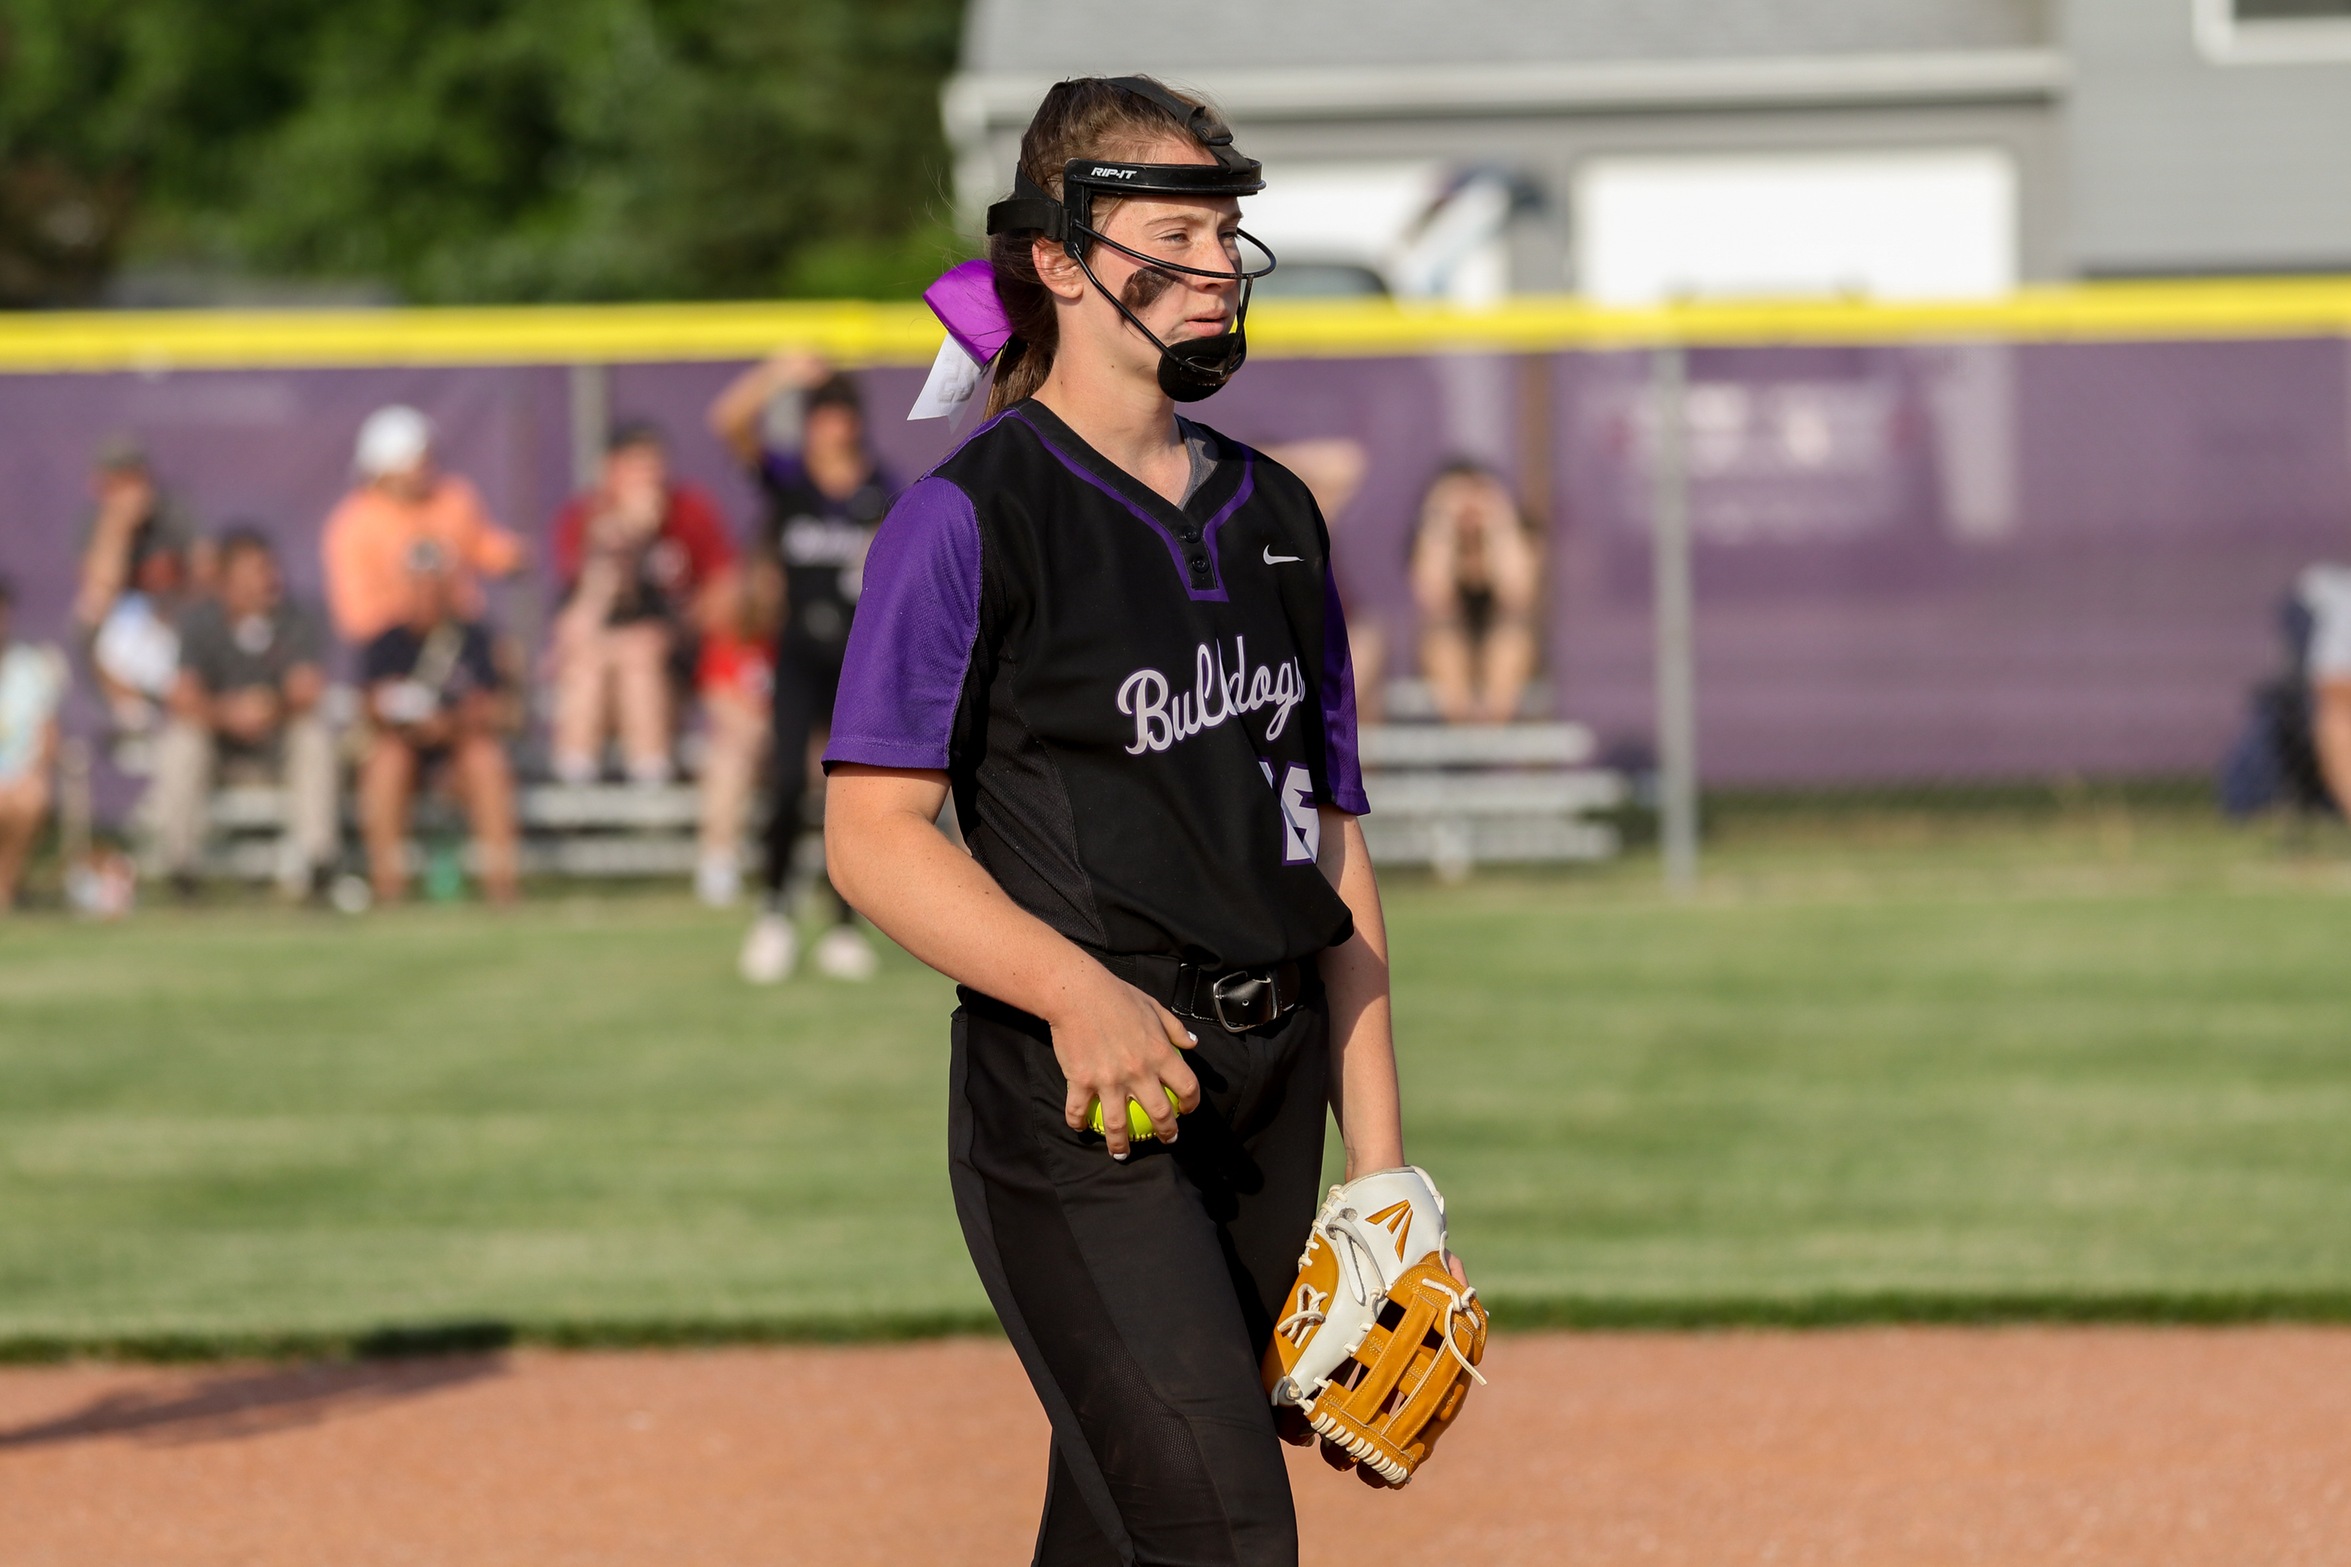 PREVIEW: No.9 Softball to open 2021 with Tri-West, Cathedral